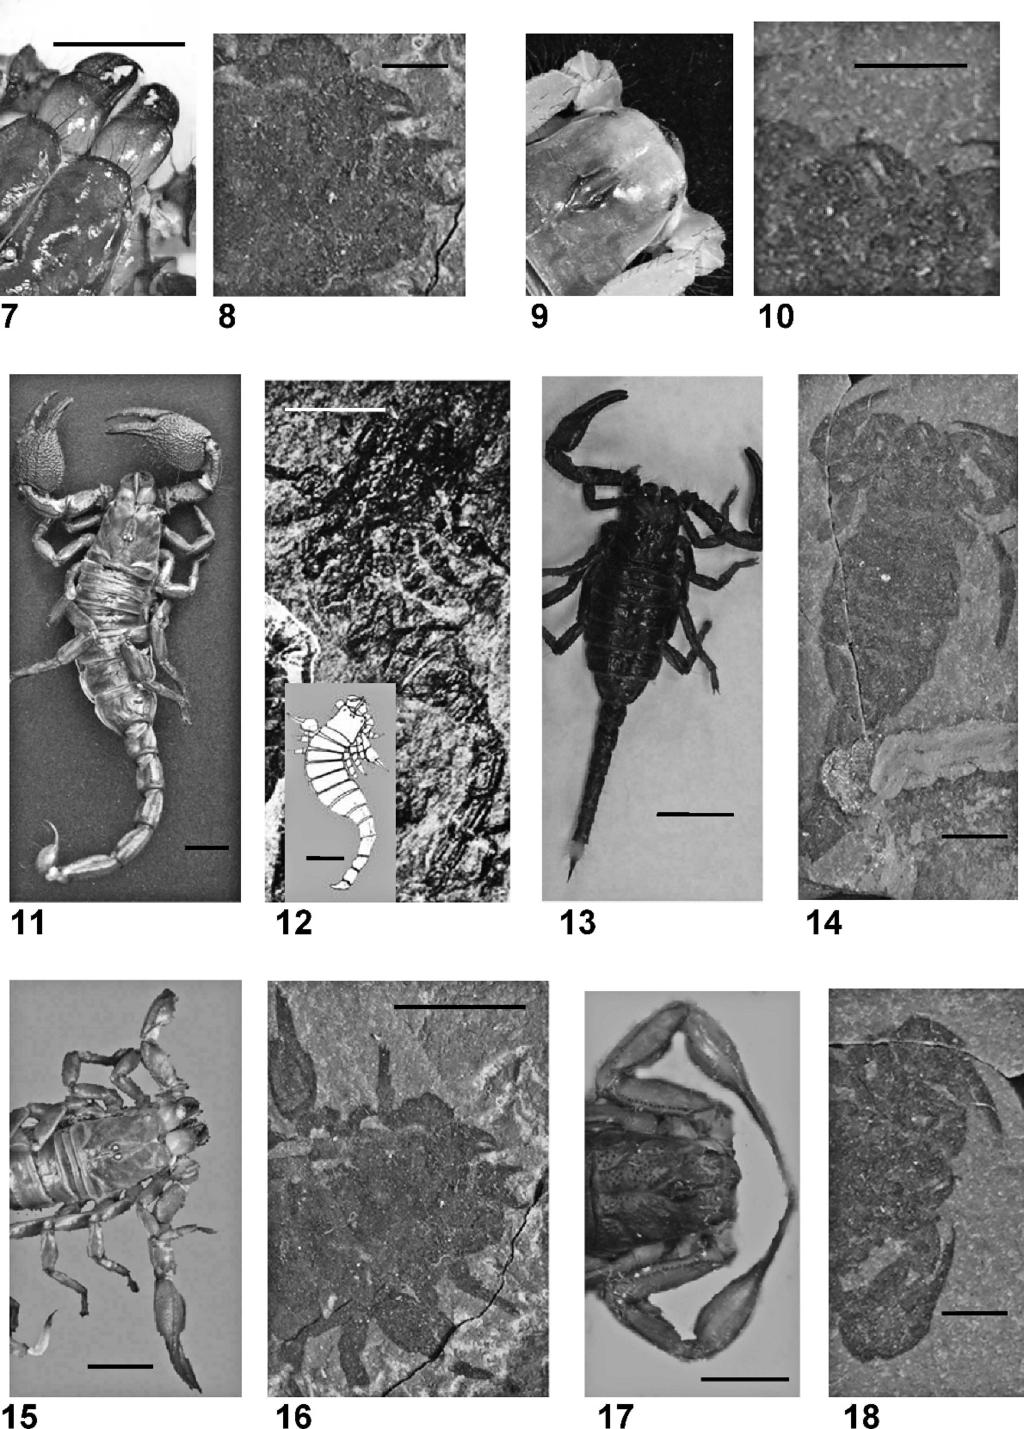 318 THE JOURNAL OF ARACHNOLOGY Figures 7 18. Comparison of fossil scorpion molts and carcasses: 7. Modern scorpion molt with extended chelicerae, scale bar is 5 mm; 8.